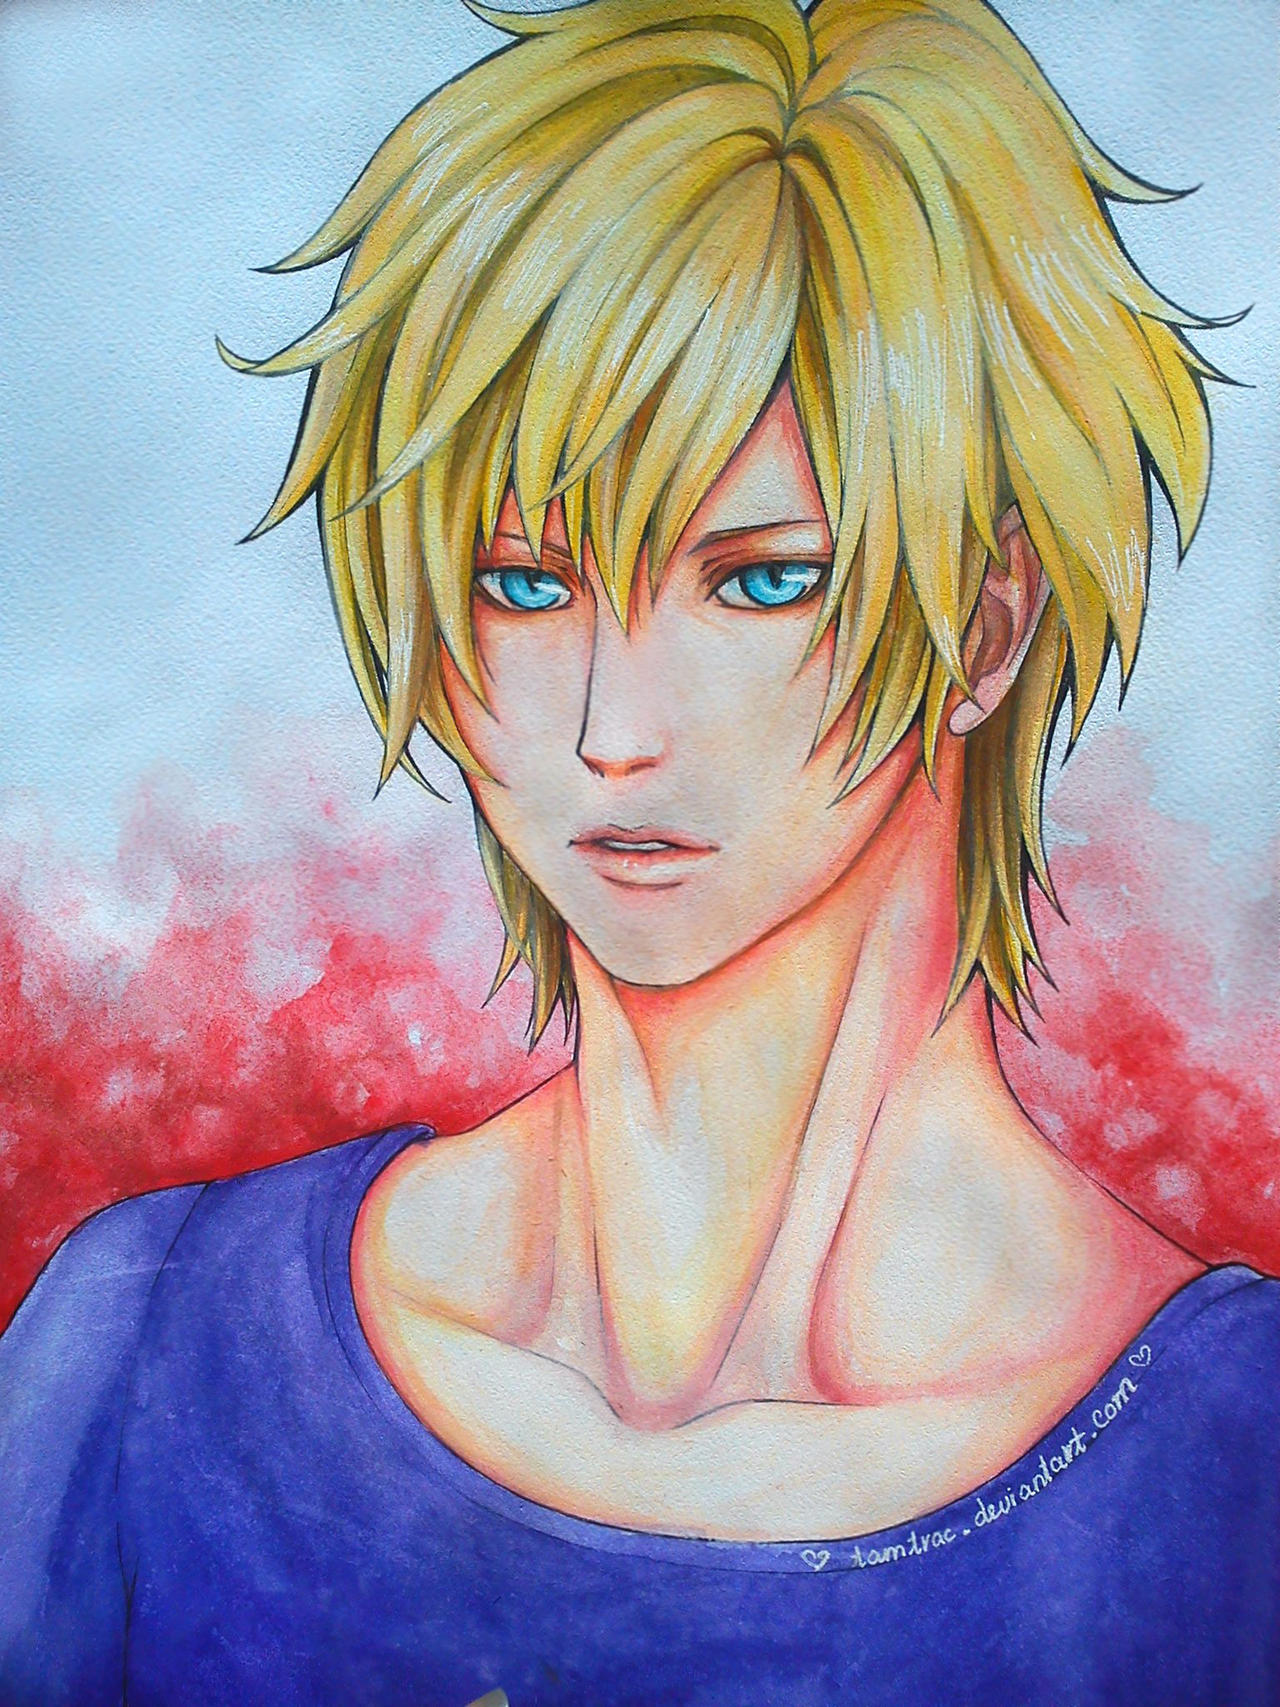 anime boy with blonde hair by tamtrac on DeviantArt